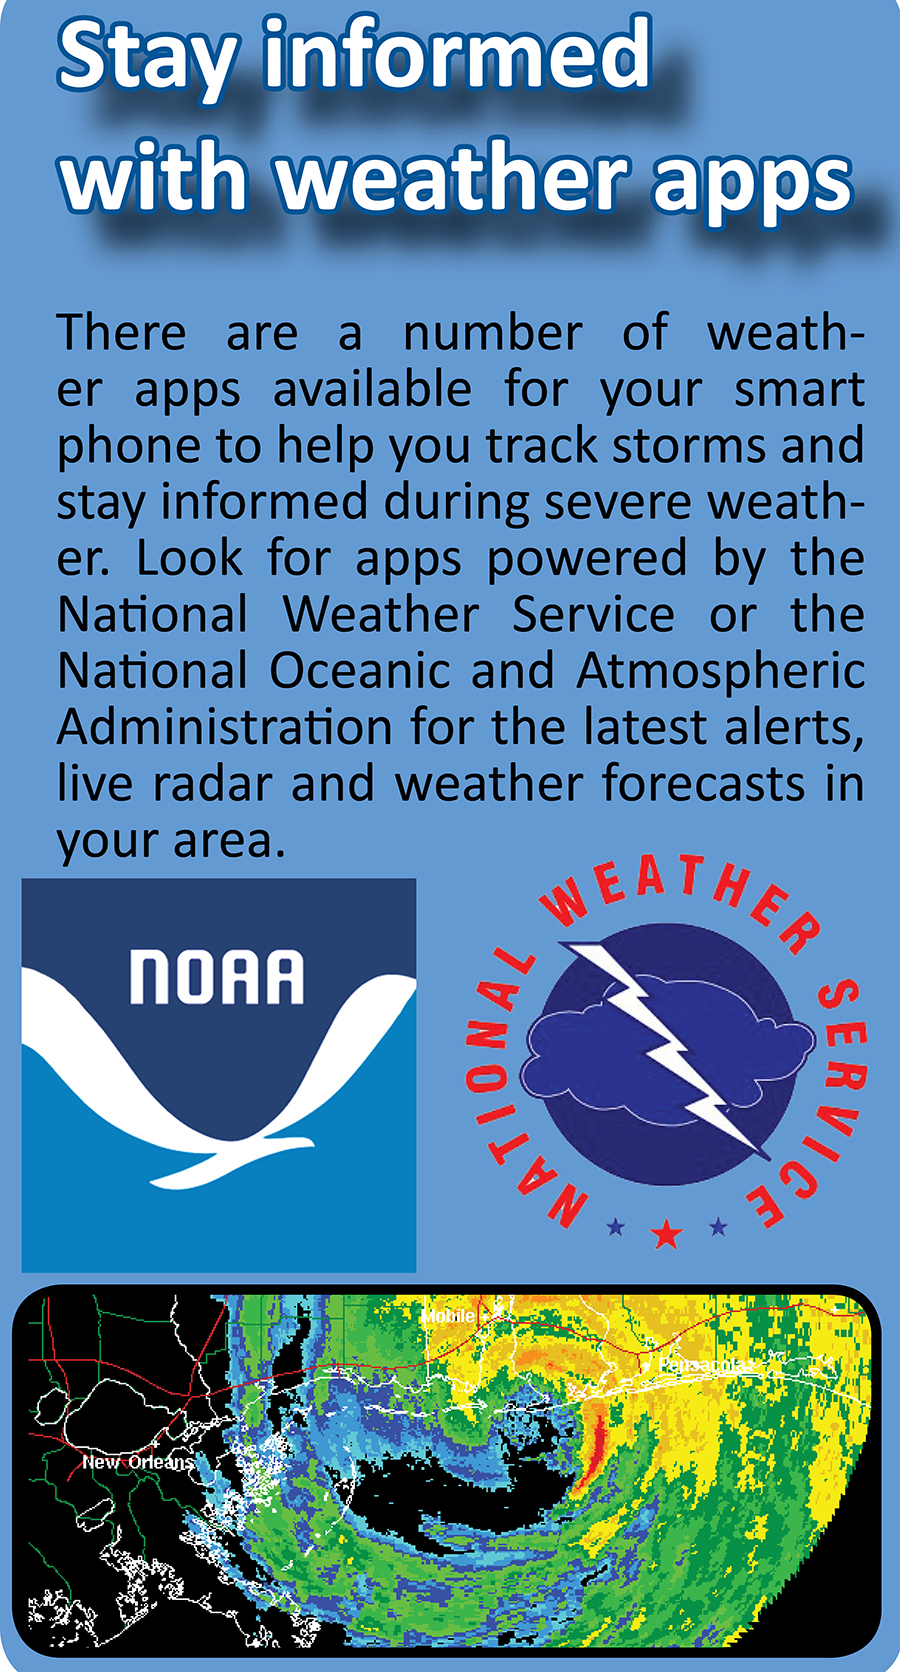 Look for weather apps powered by the National Weather Service or the National Oceanic and Atmospheric Administration.